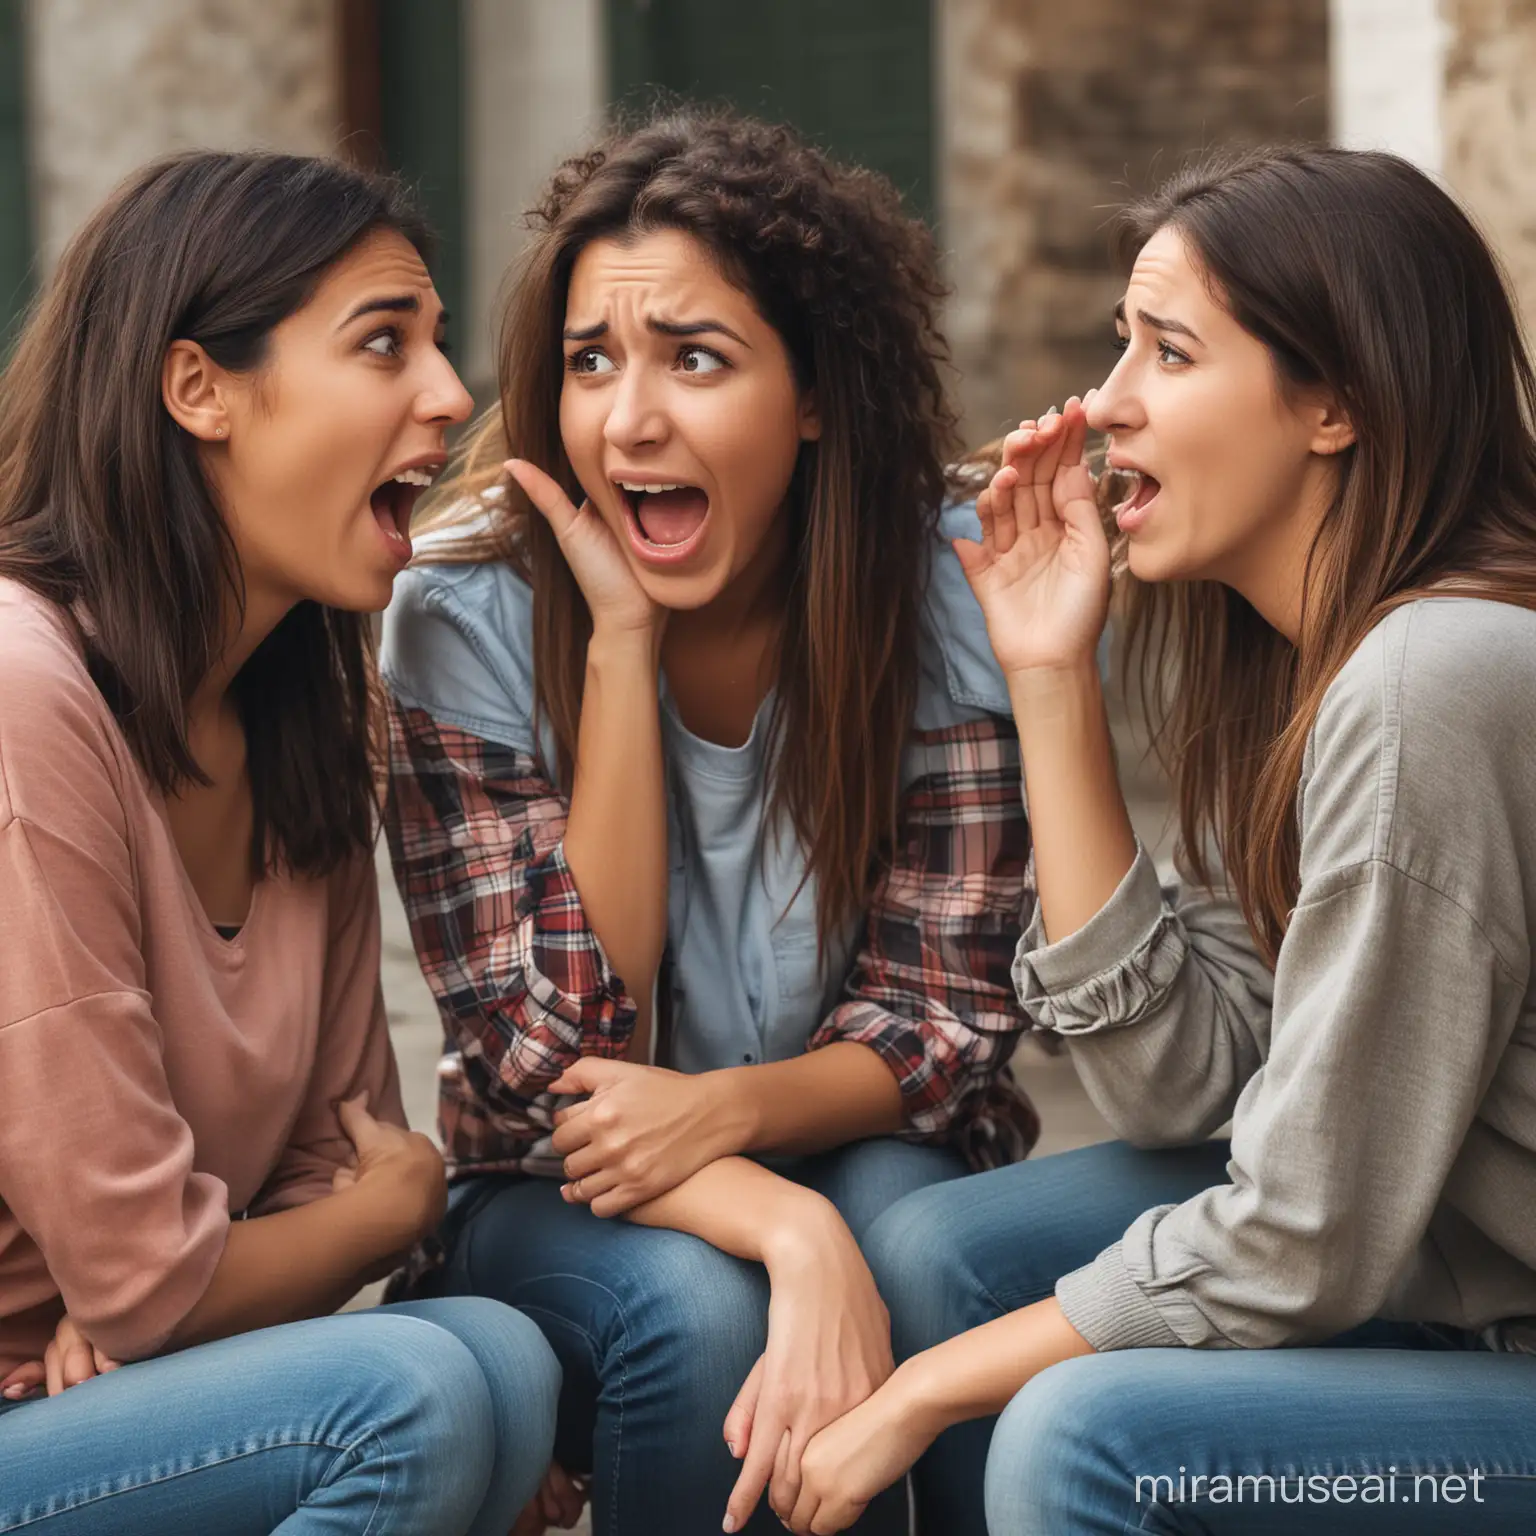 Three Friends Gossiping Animated Conversation with Expressive Reactions